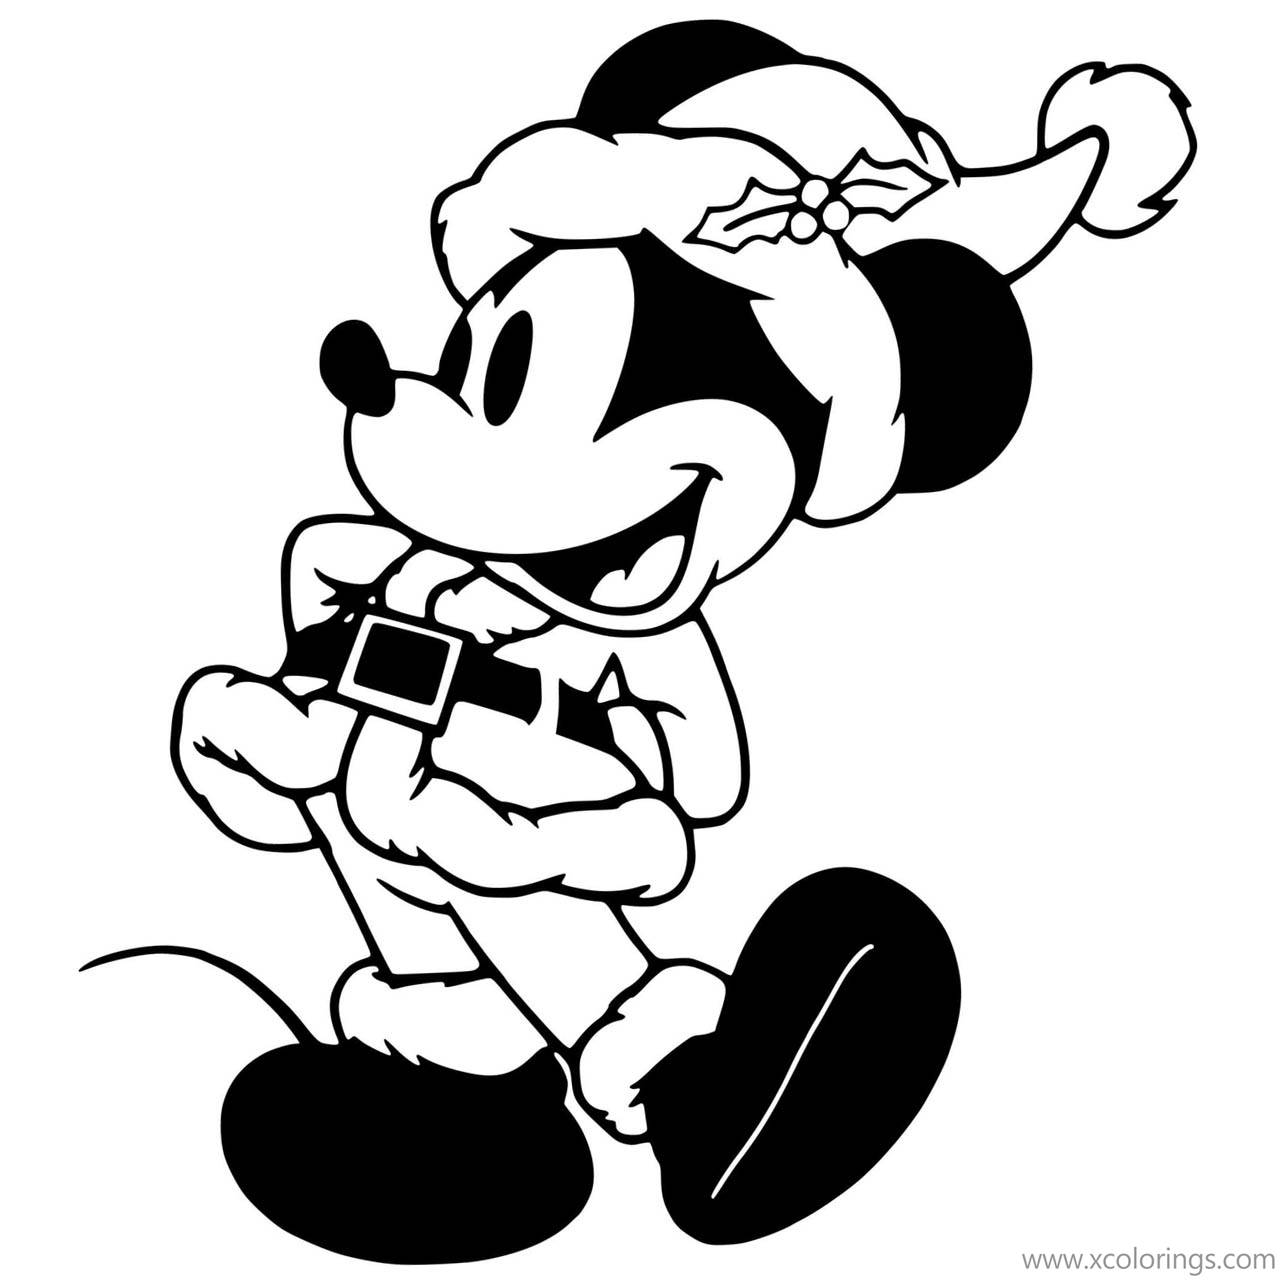 Free Santa Claus Mickey Mouse Christmas Coloring Pages printable